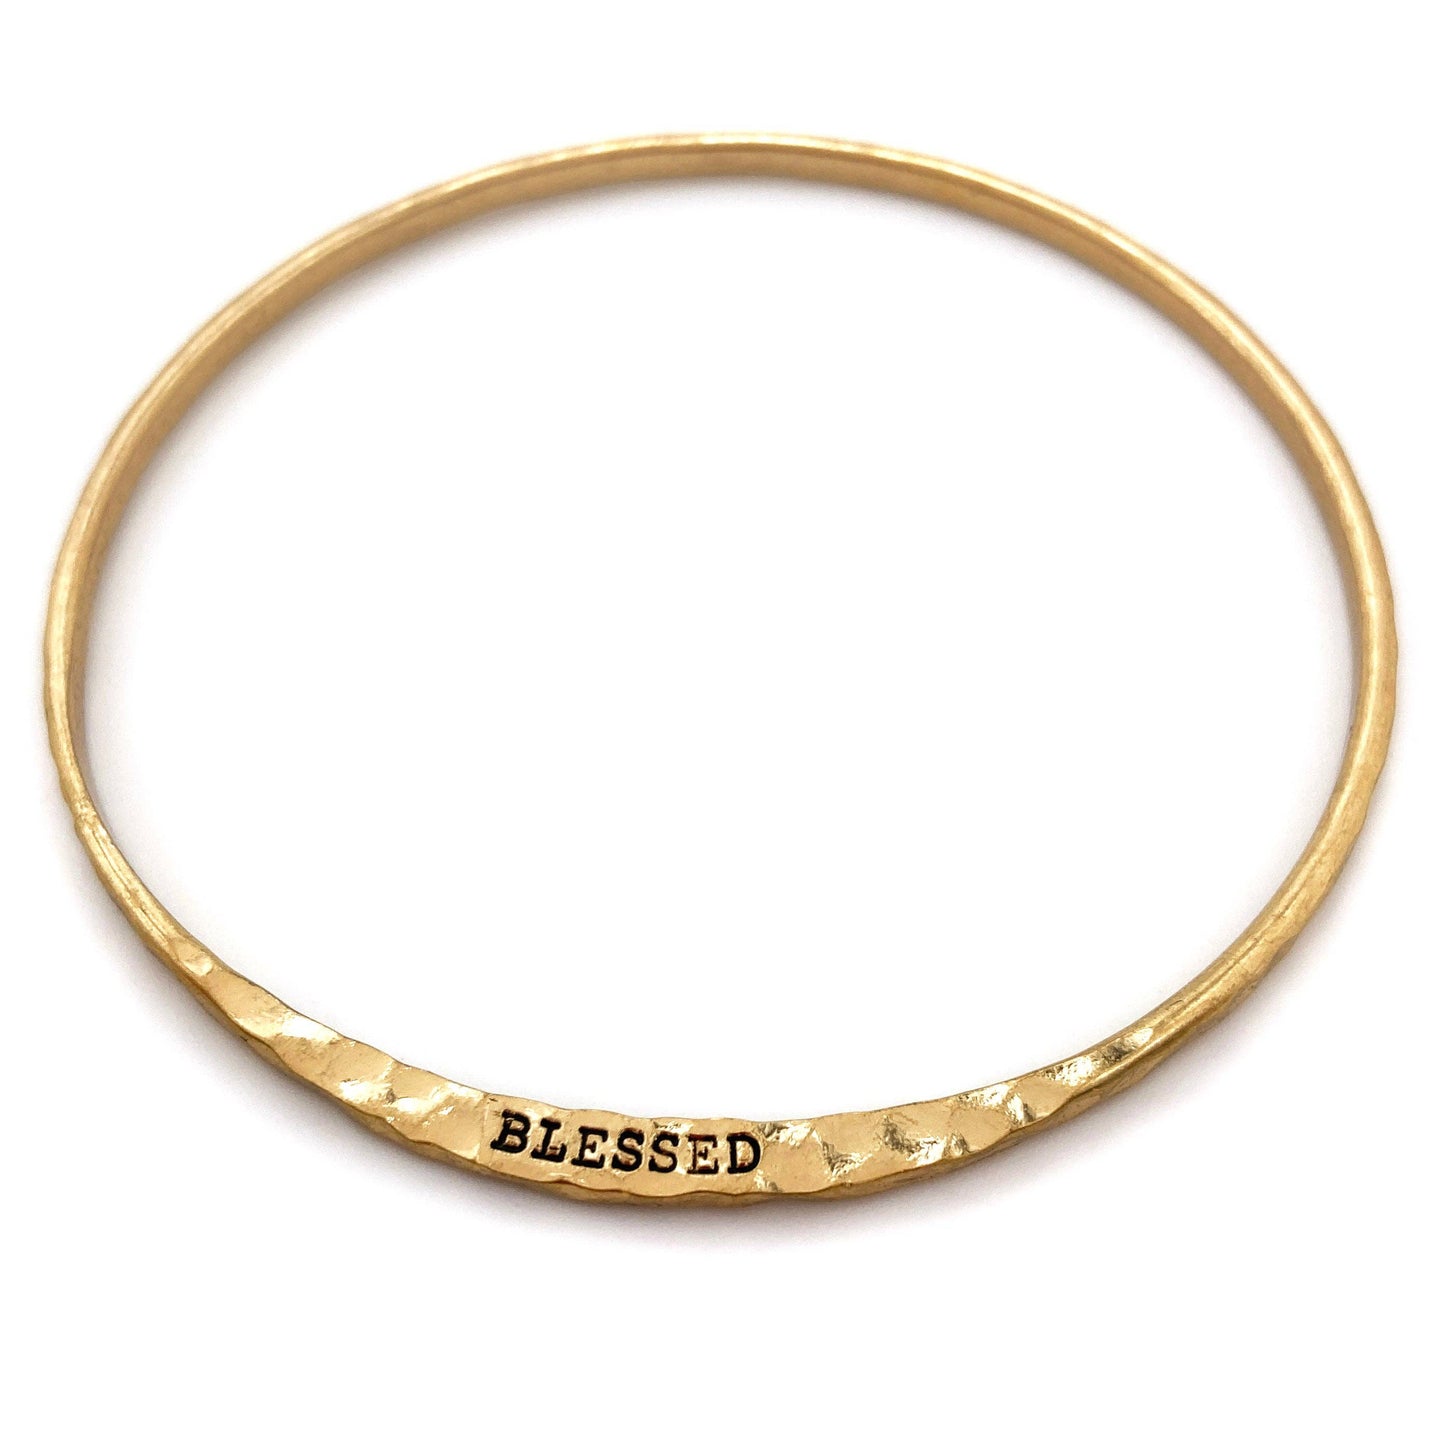 Engraved BLESSED Inspirational Message Wrist Bangle